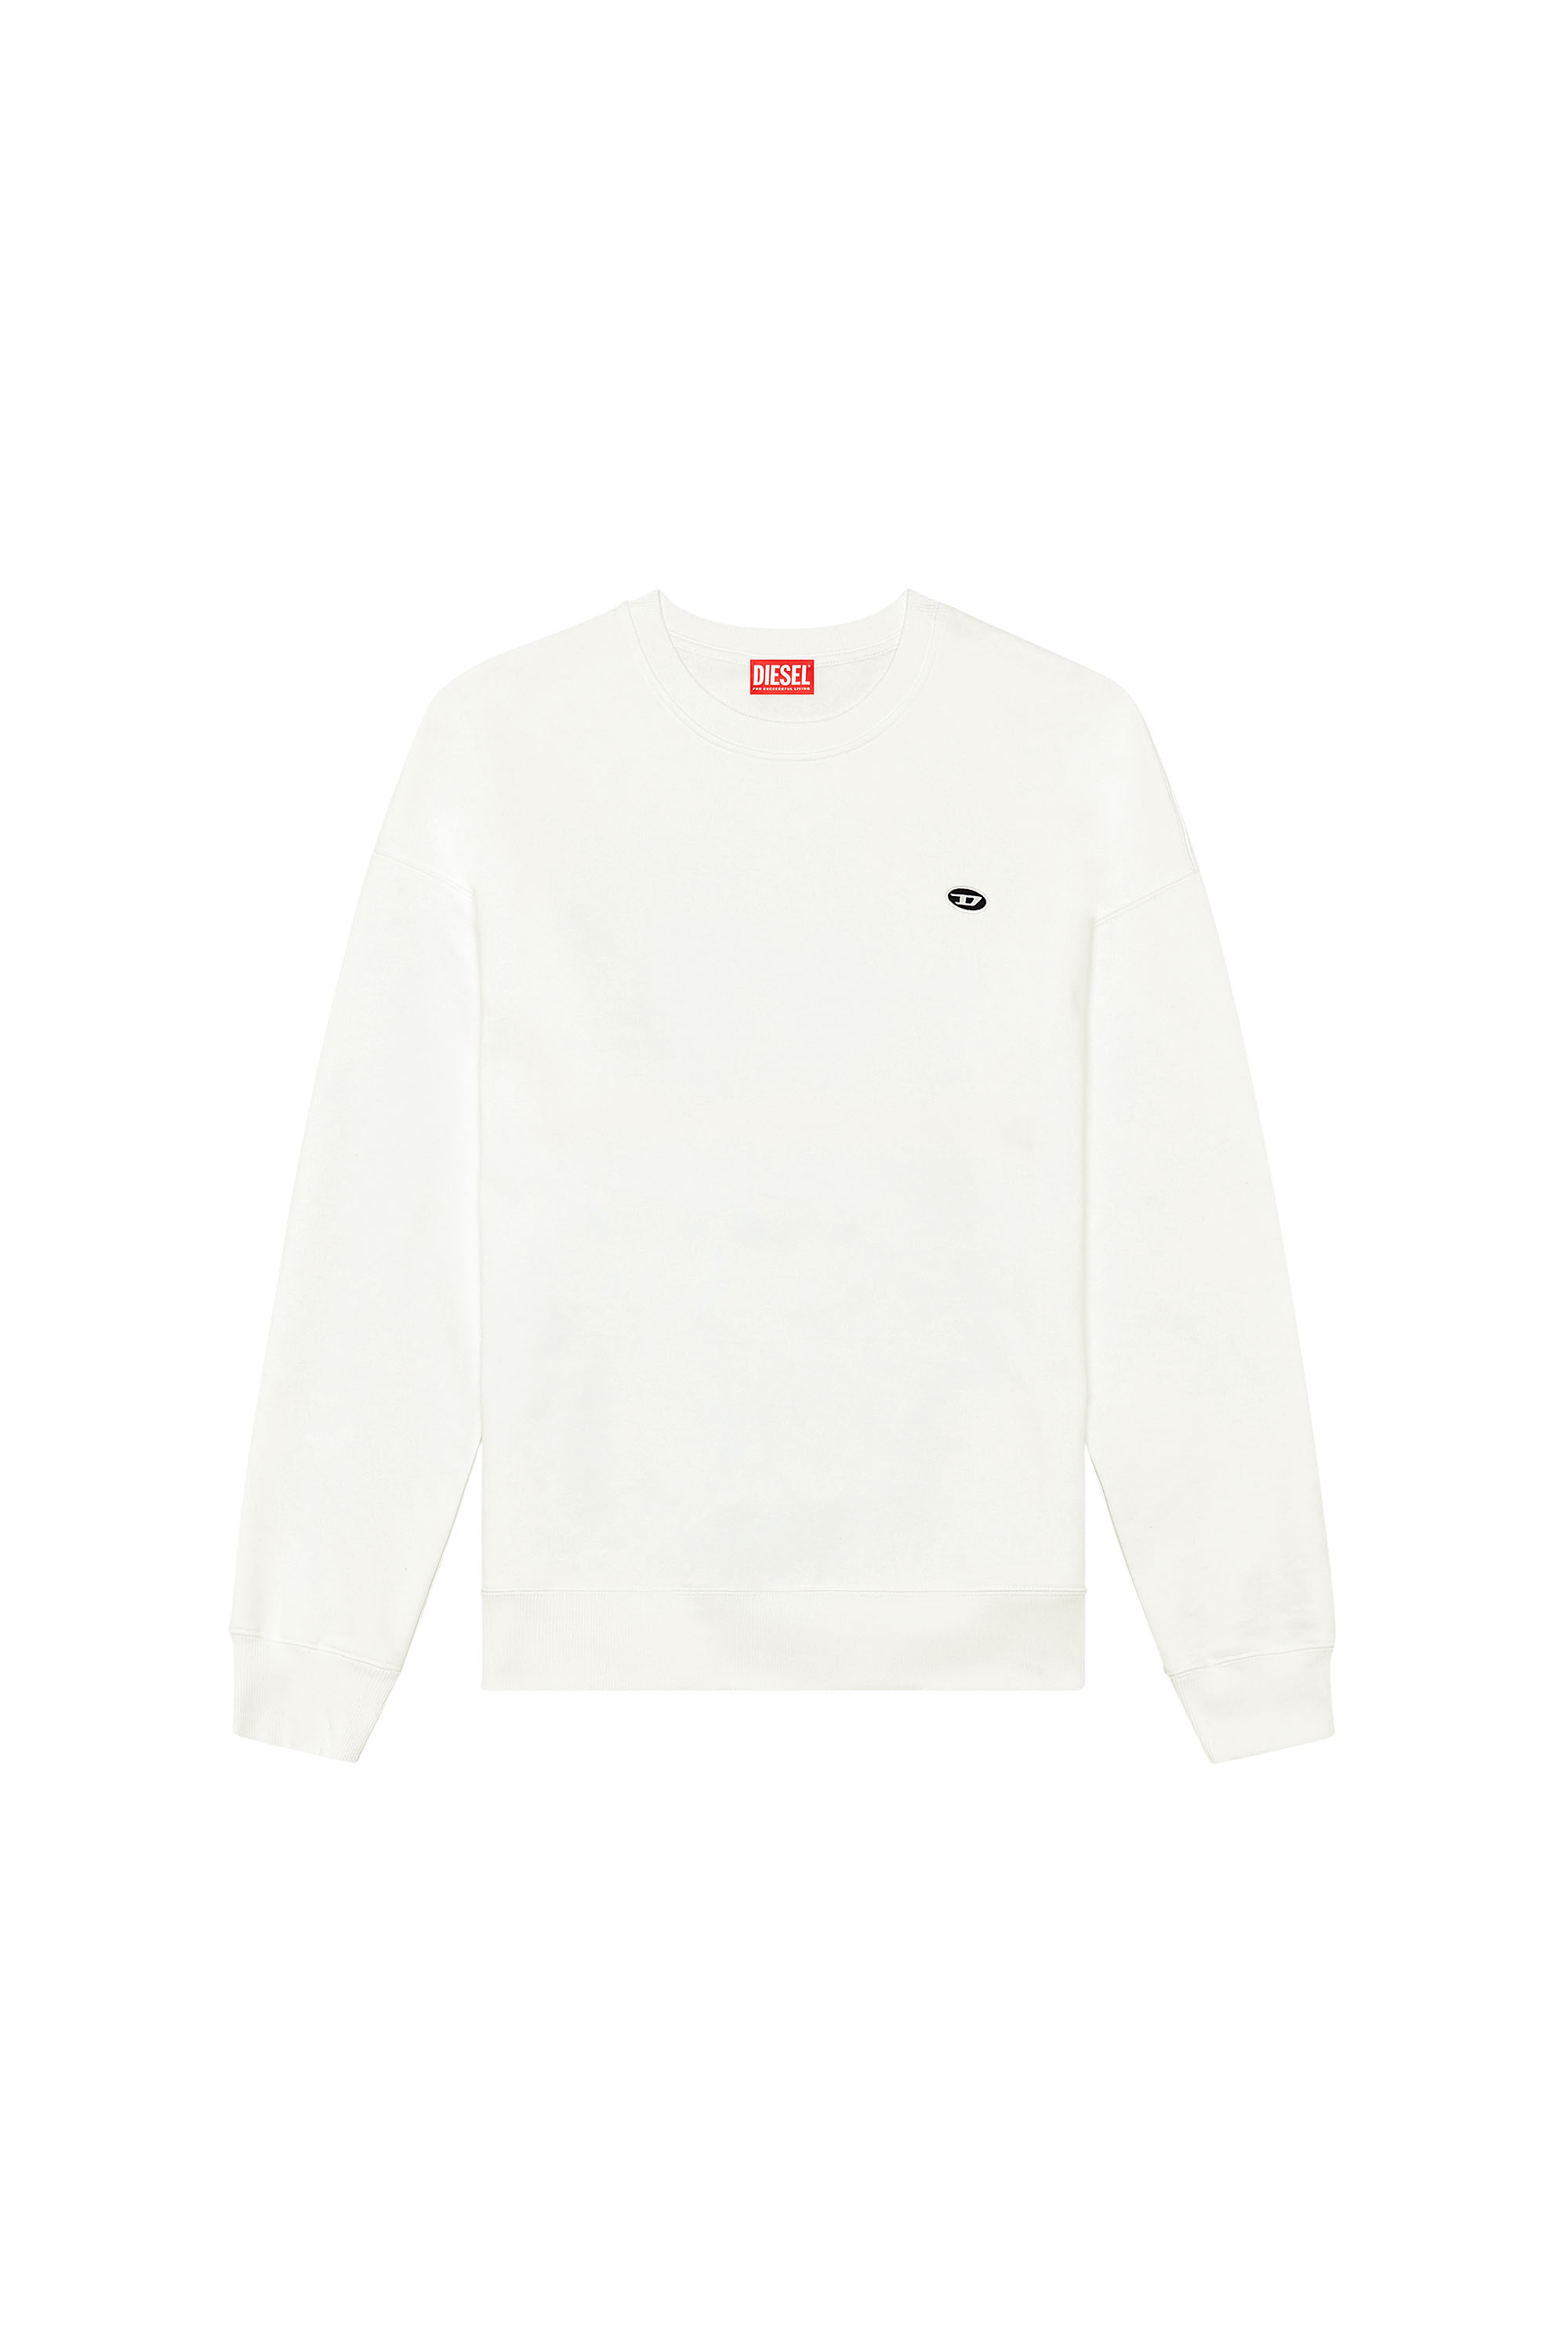 Diesel - S-ROB-DOVAL-PJ, Man Sweatshirt with oval D patch in White - Image 4